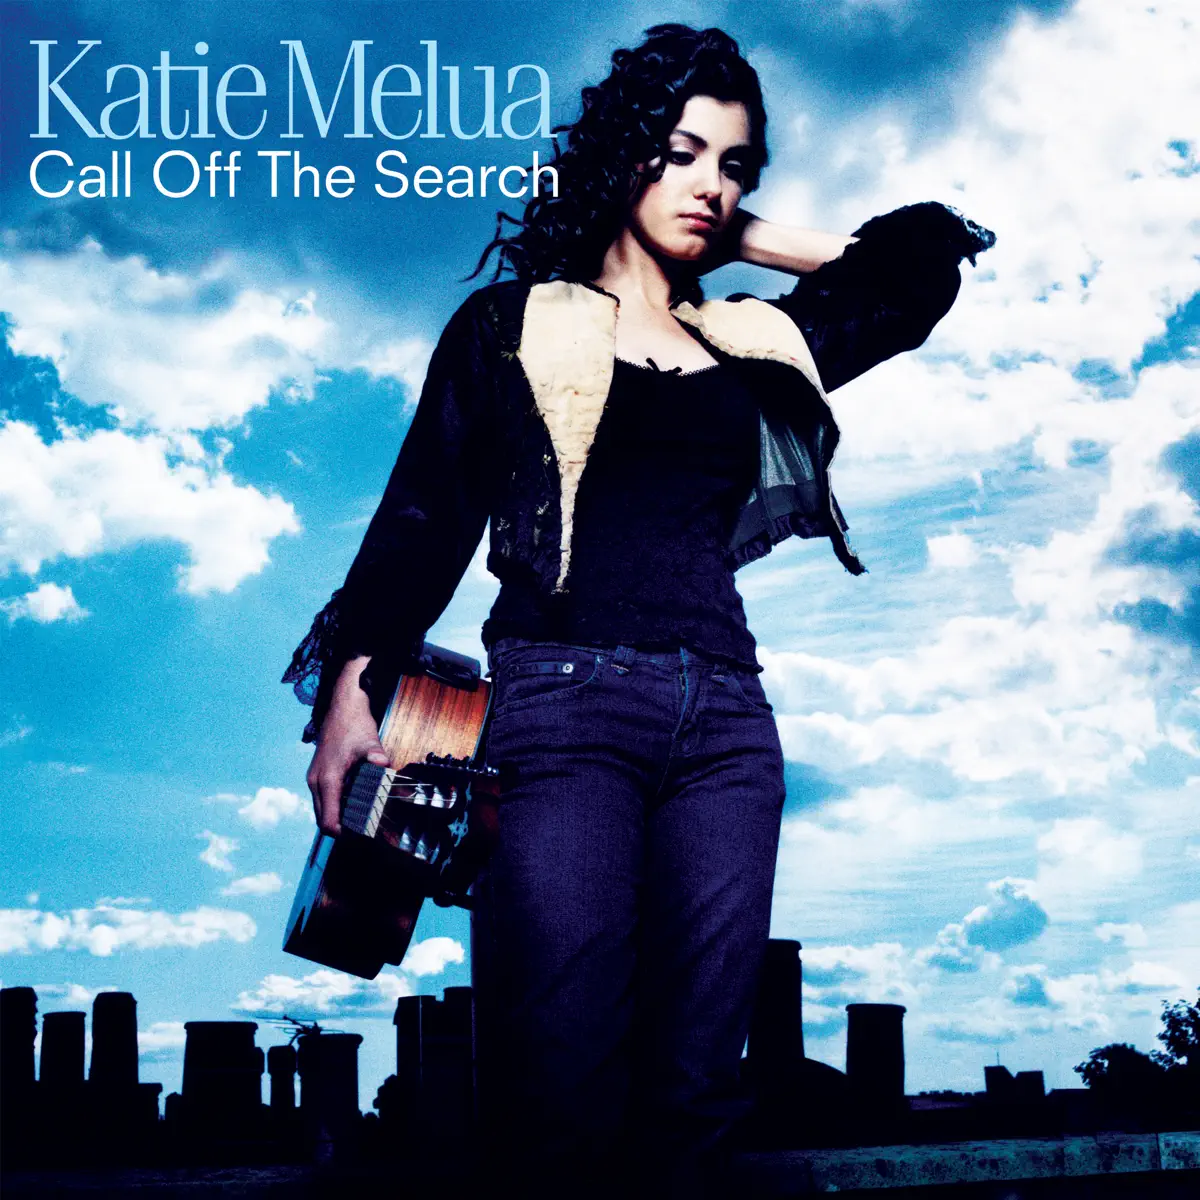 Katie Melua - Call Off The Search (2023 Remaster) - Single (2023) [iTunes Plus AAC M4A]-新房子